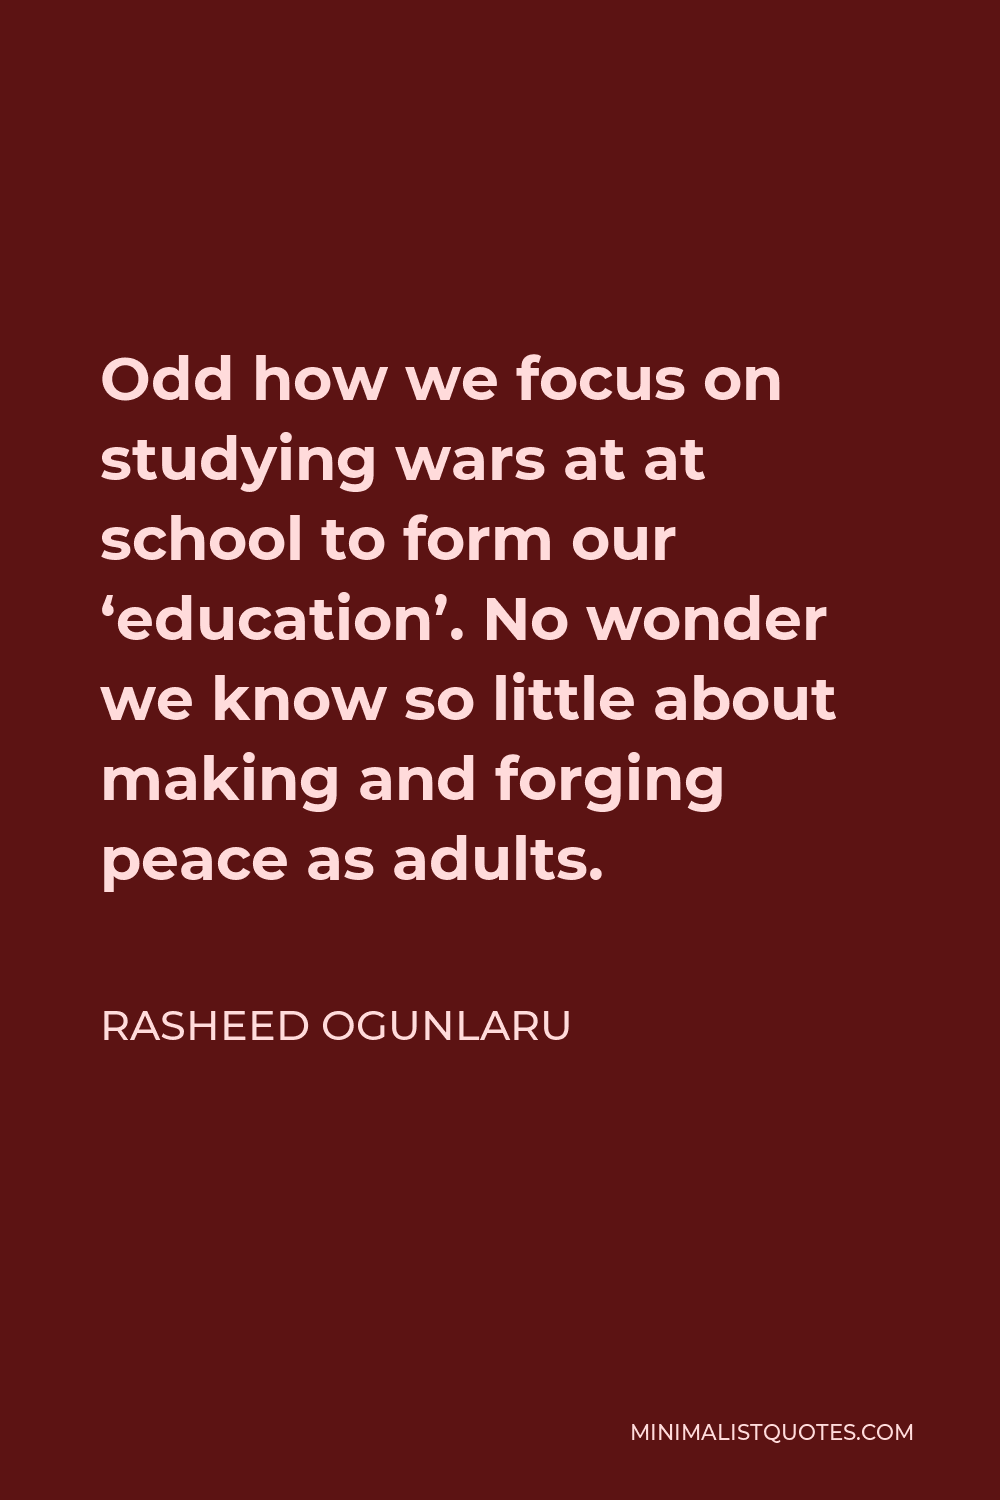 Rasheed Ogunlaru Quote - Odd how we focus on studying wars at at school to form our ‘education’. No wonder we know so little about making and forging peace as adults.